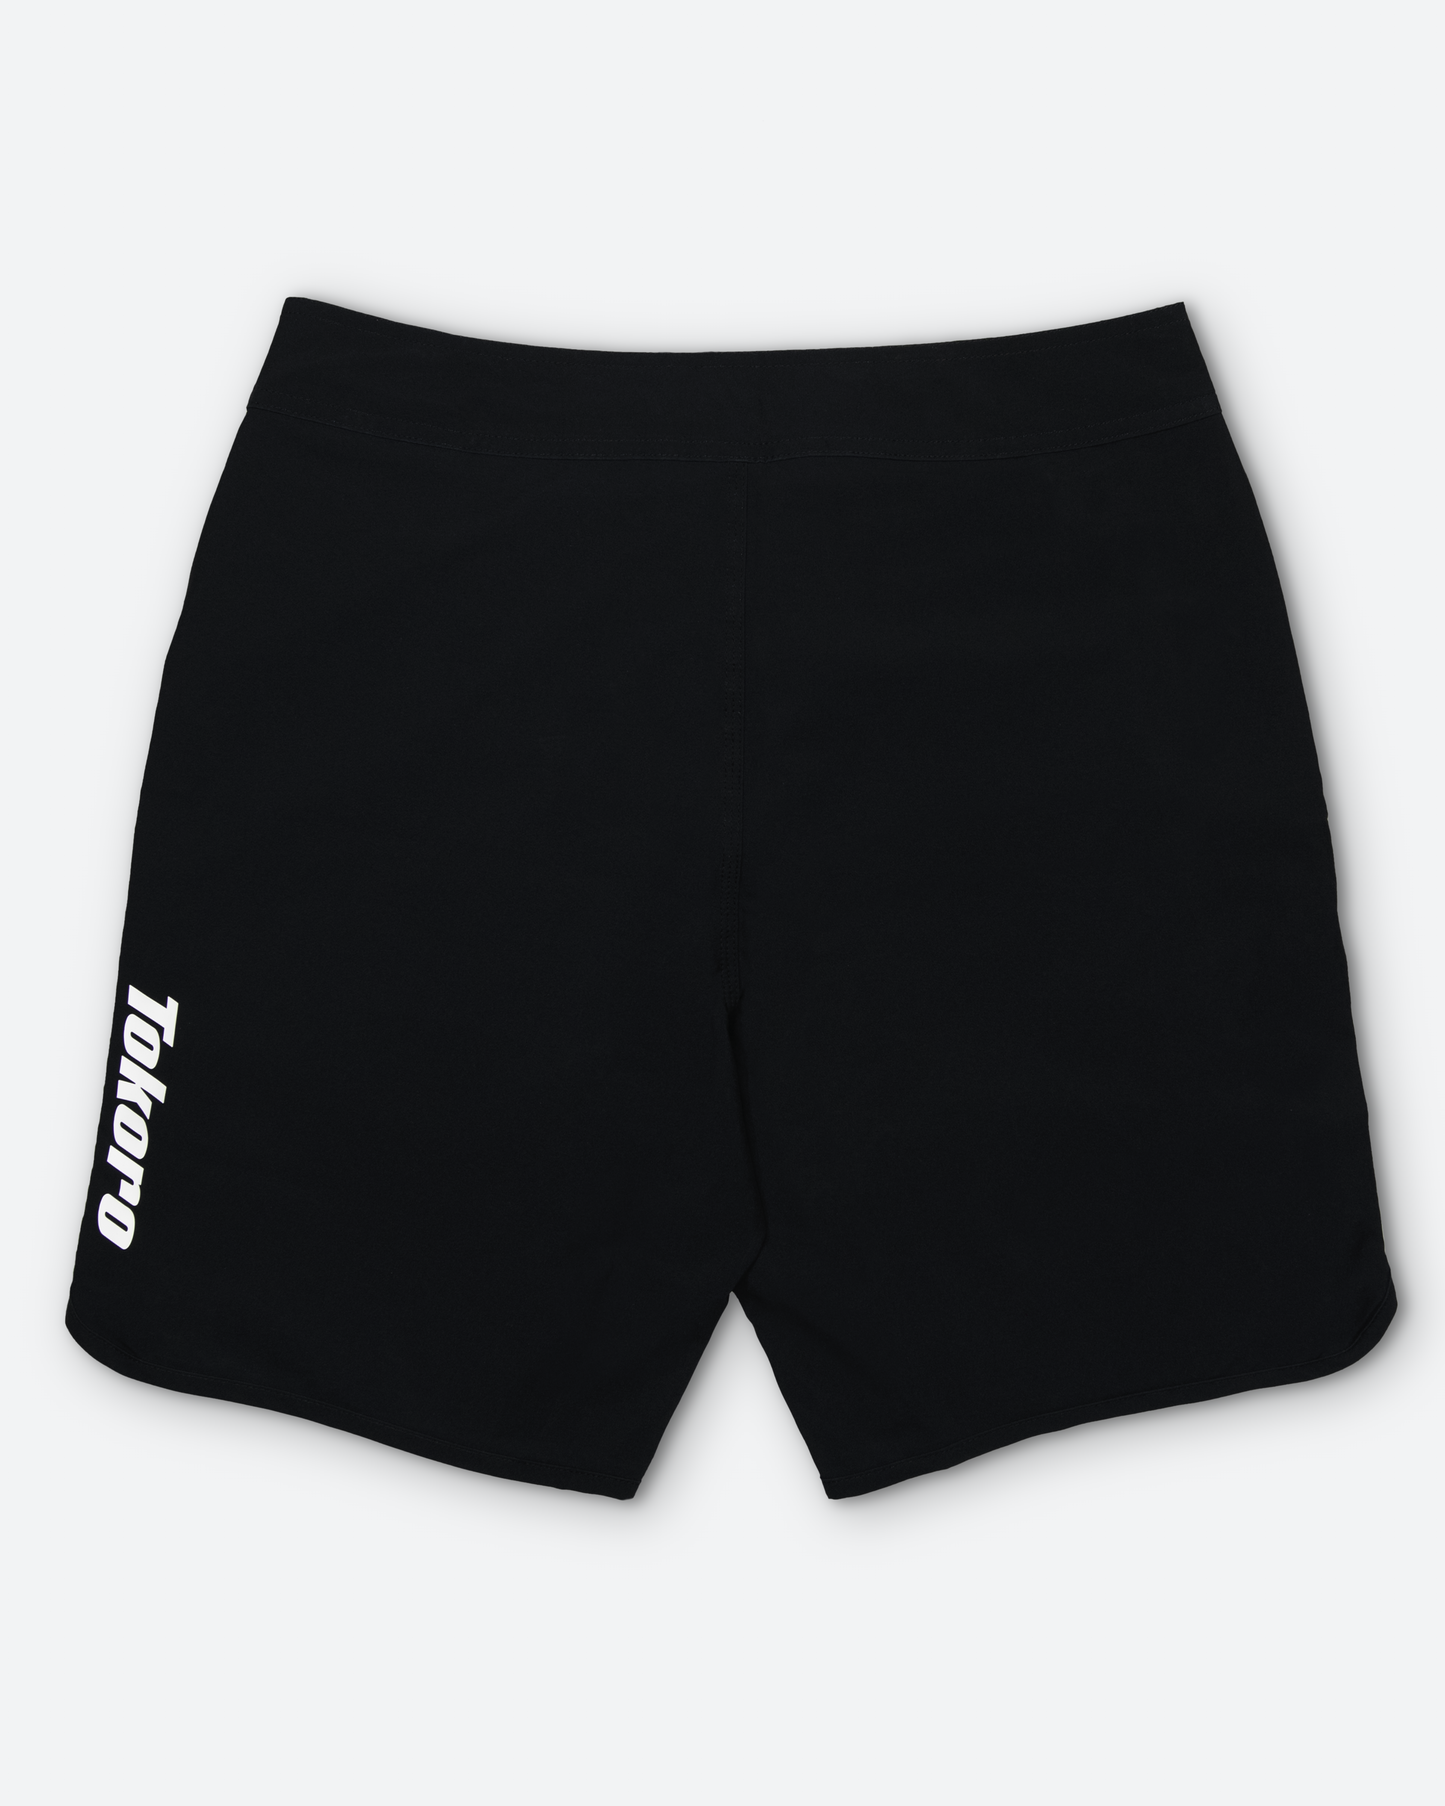 Priority Series High Performance Boardshorts - Solid Black 18"